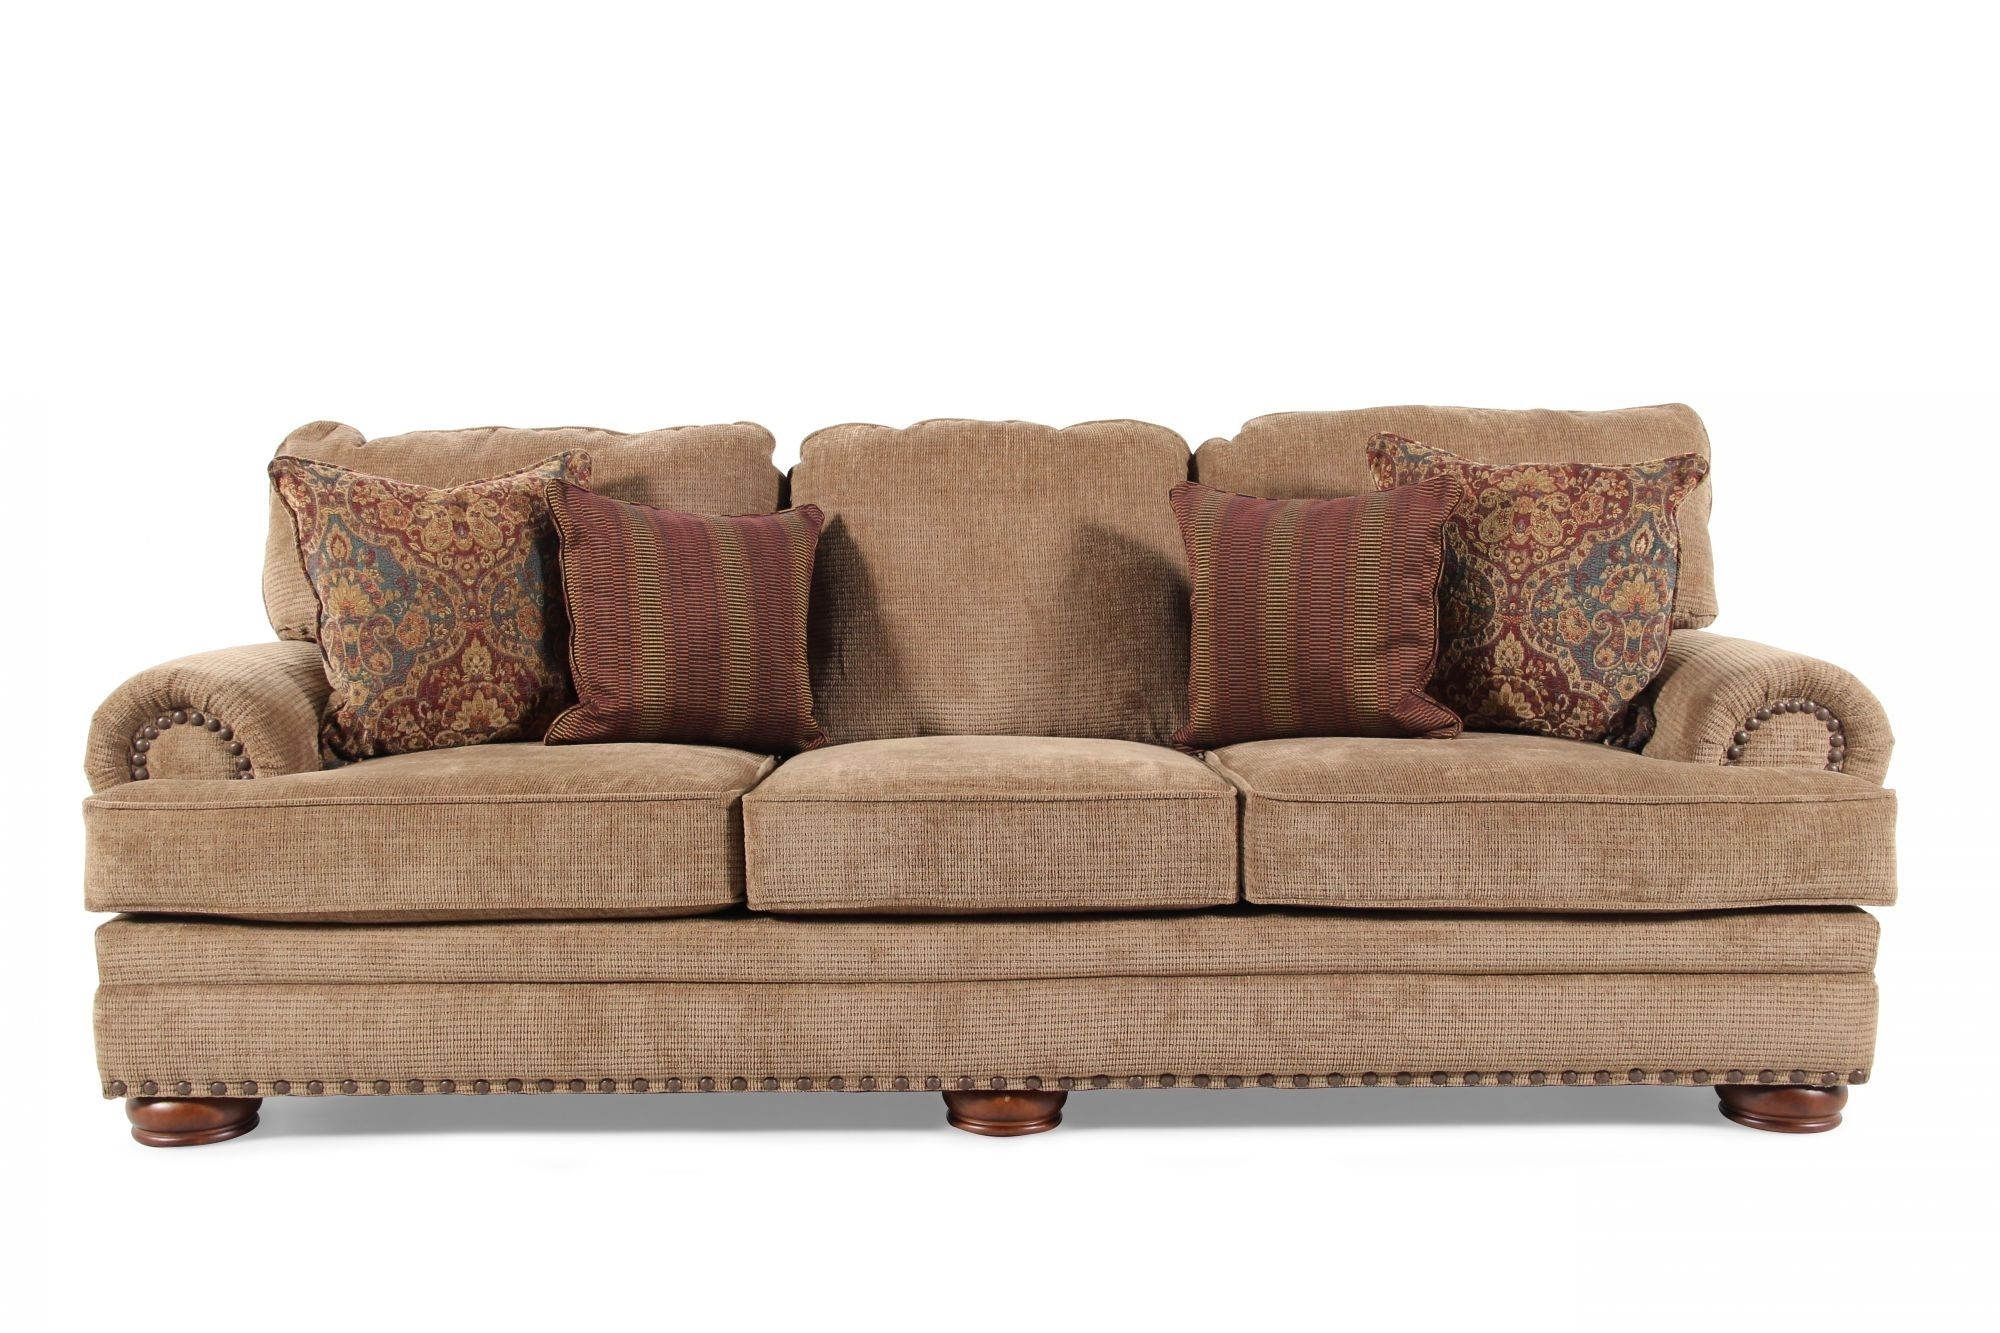 mathis brothers sofa beds